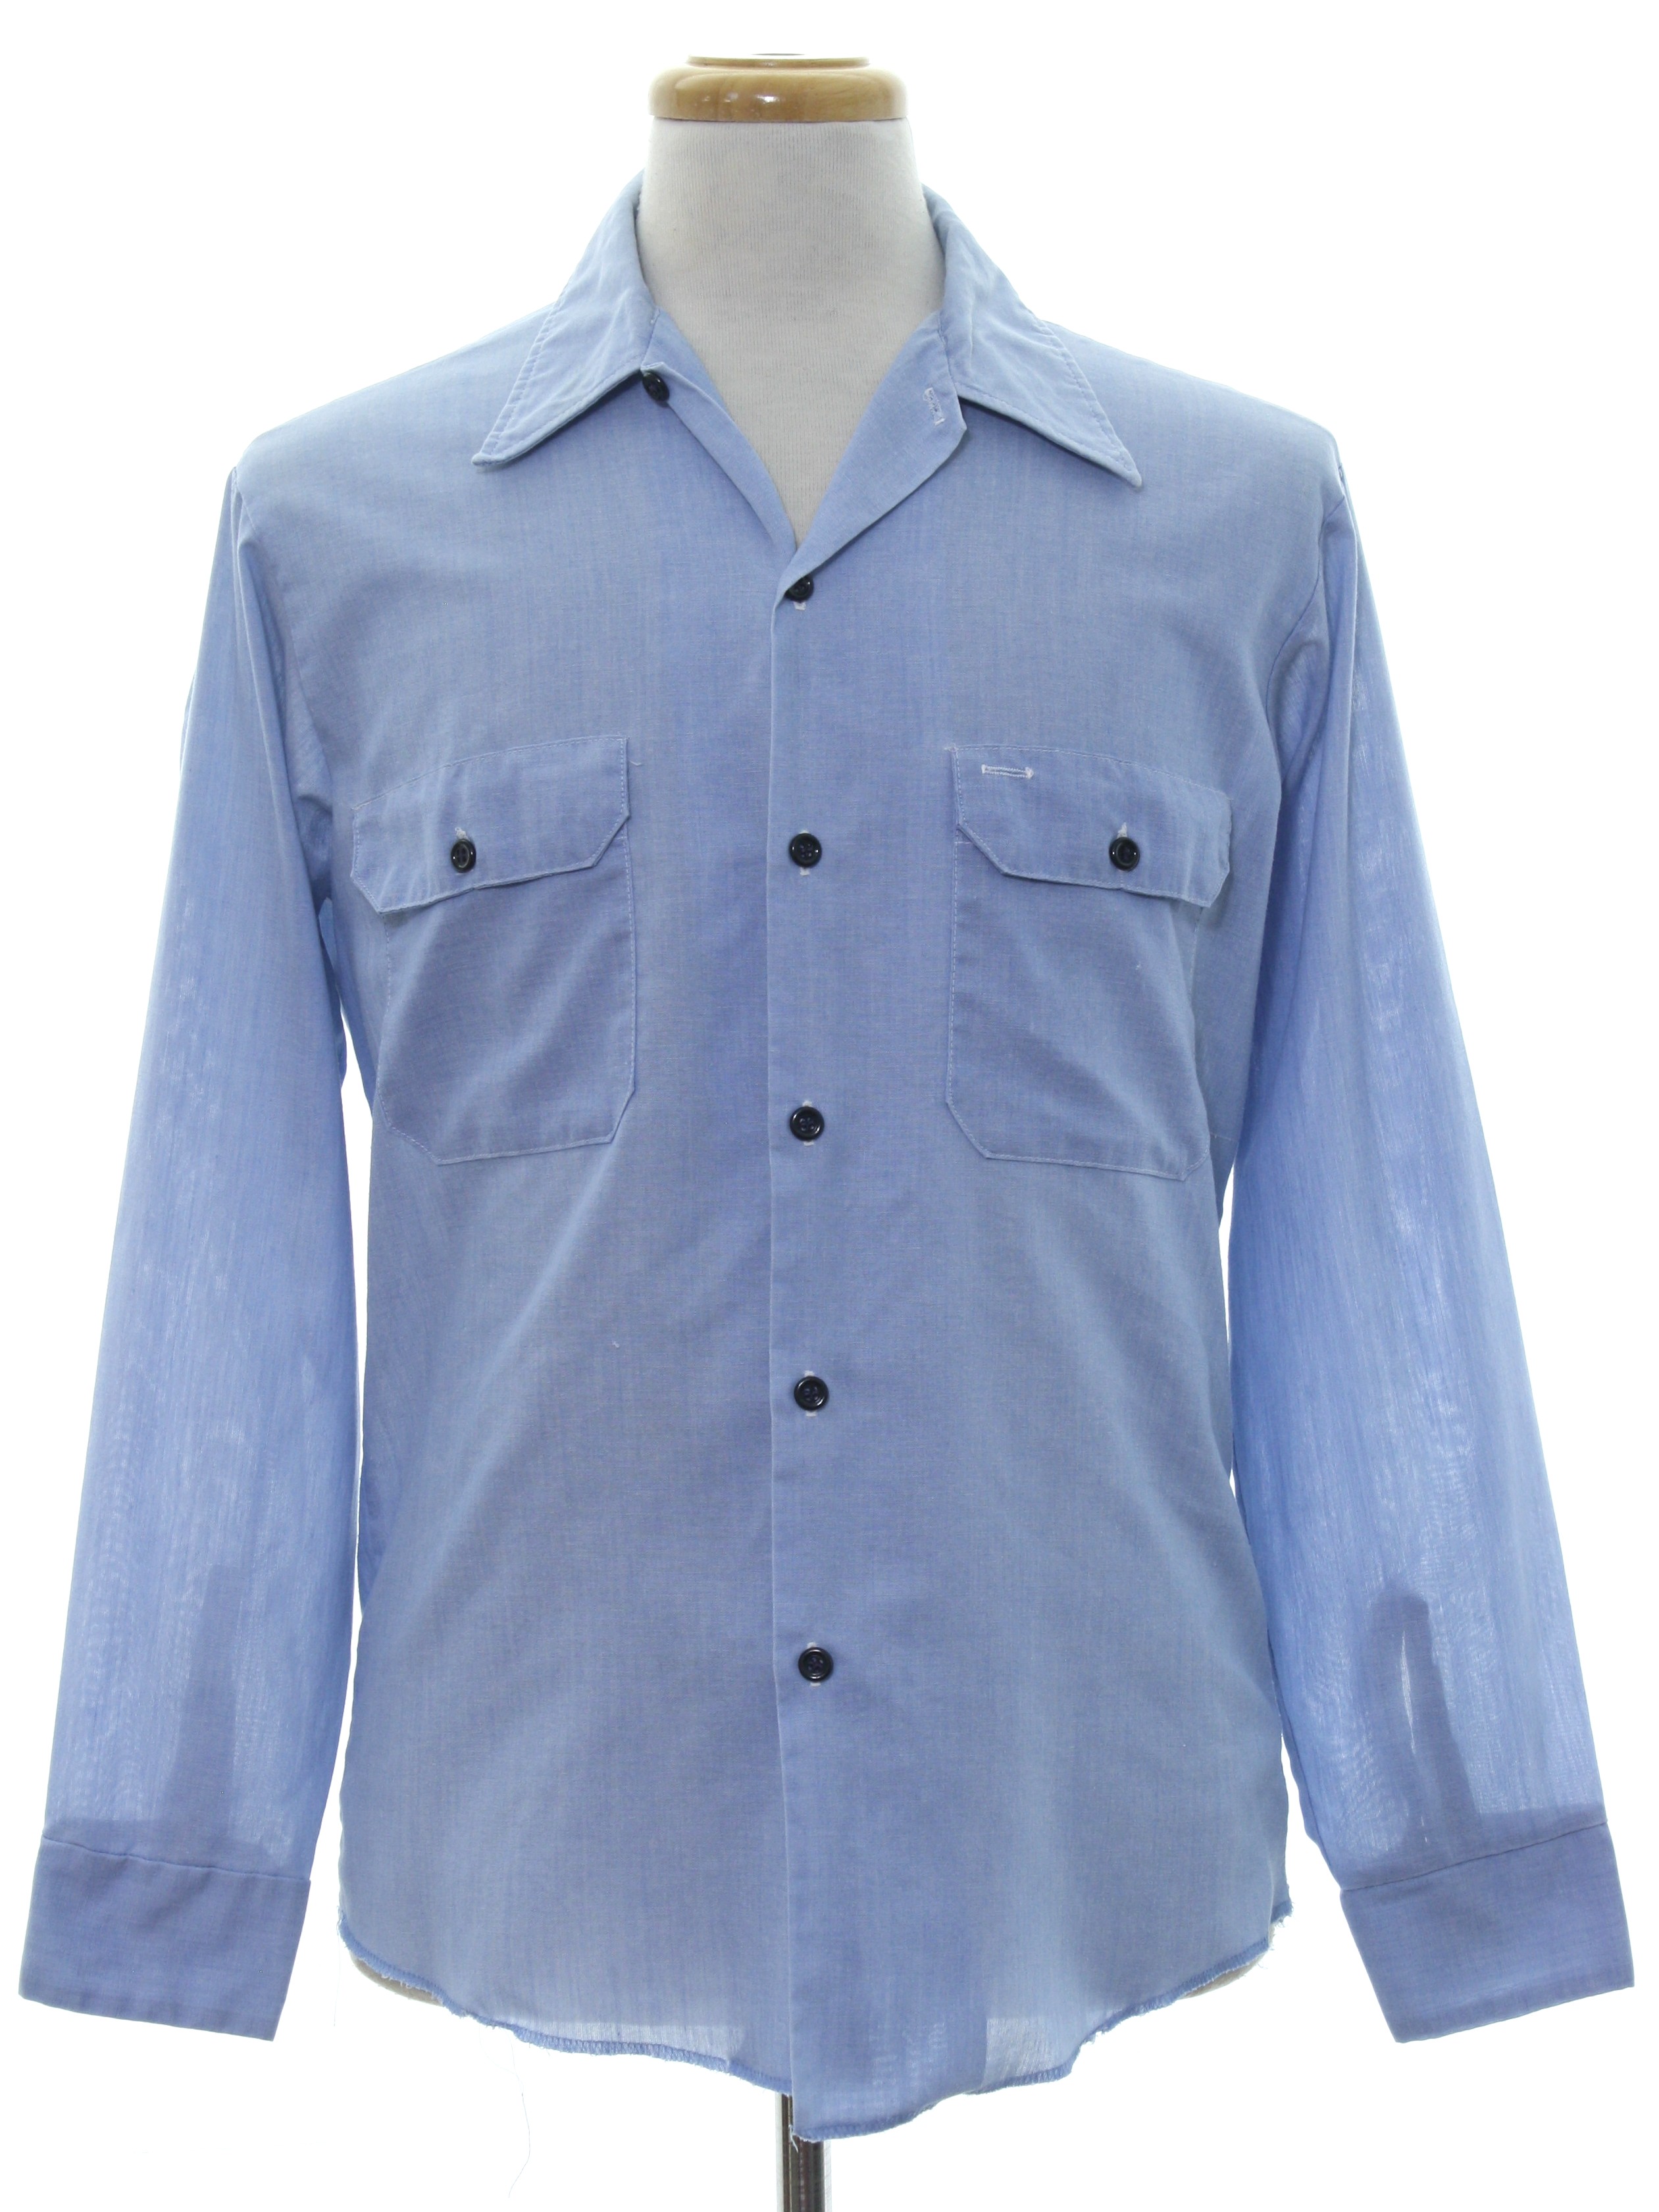 Vintage Sears Seventies Hippie Shirt: 70s -Sears- Mens chambray blue ...